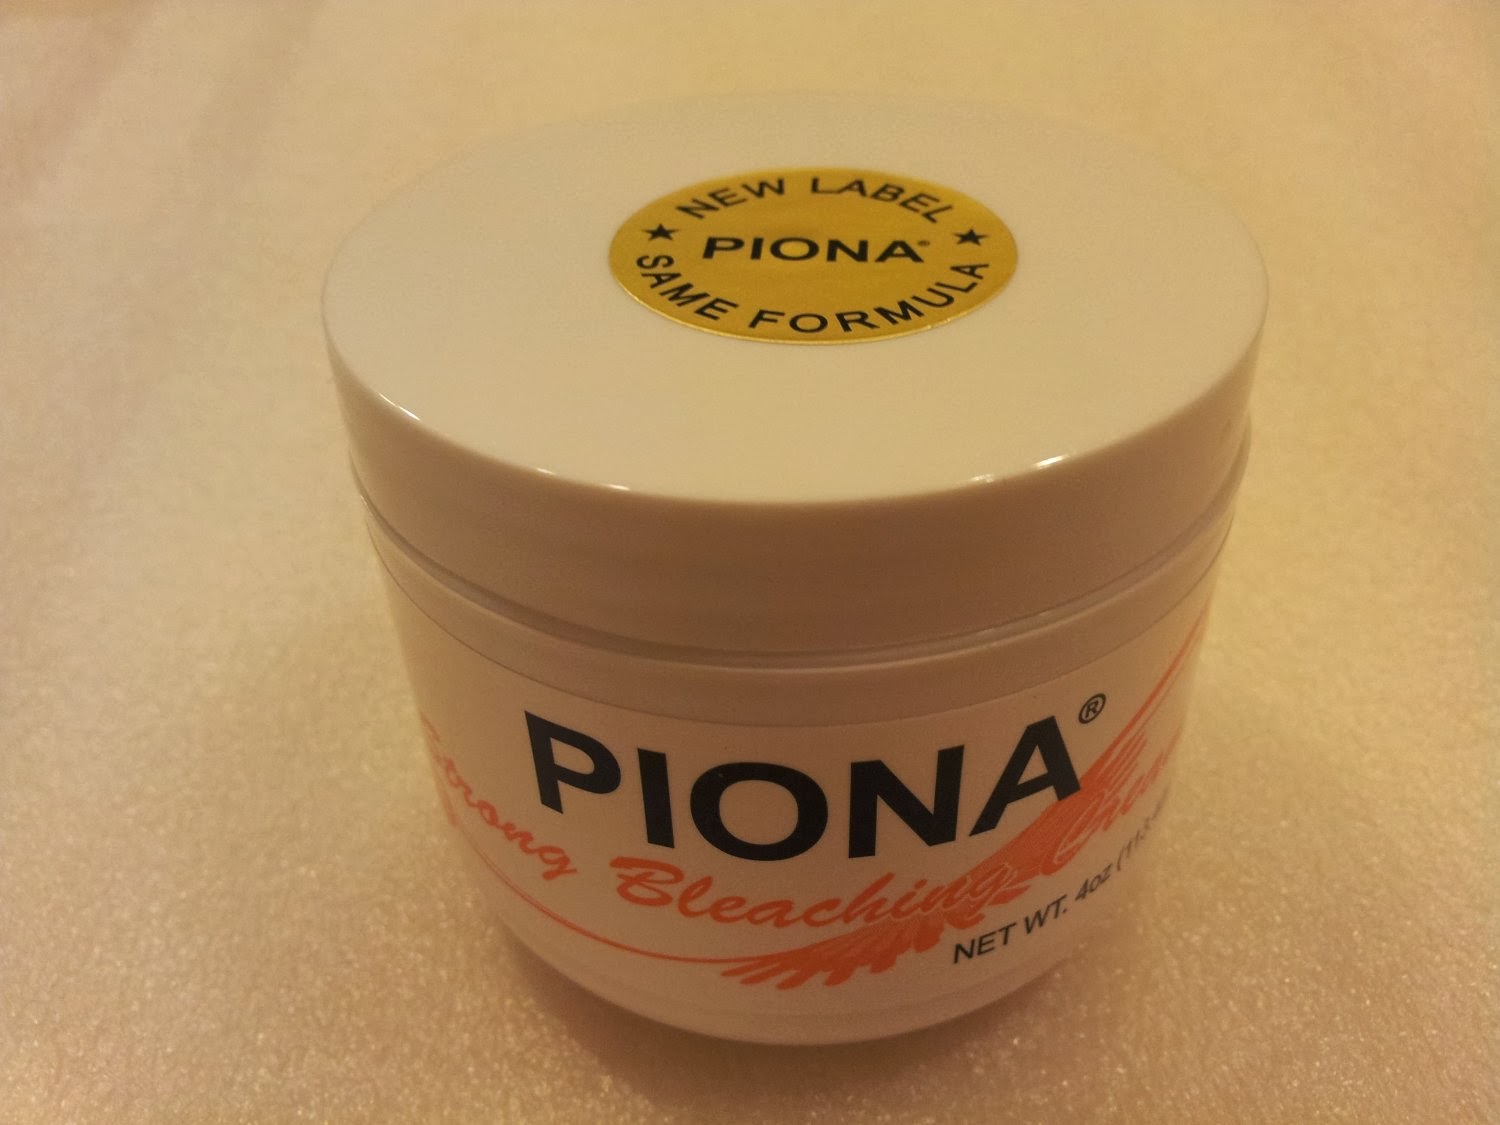 Piona skin bleaching cream is a very strong whitening cream. Works 